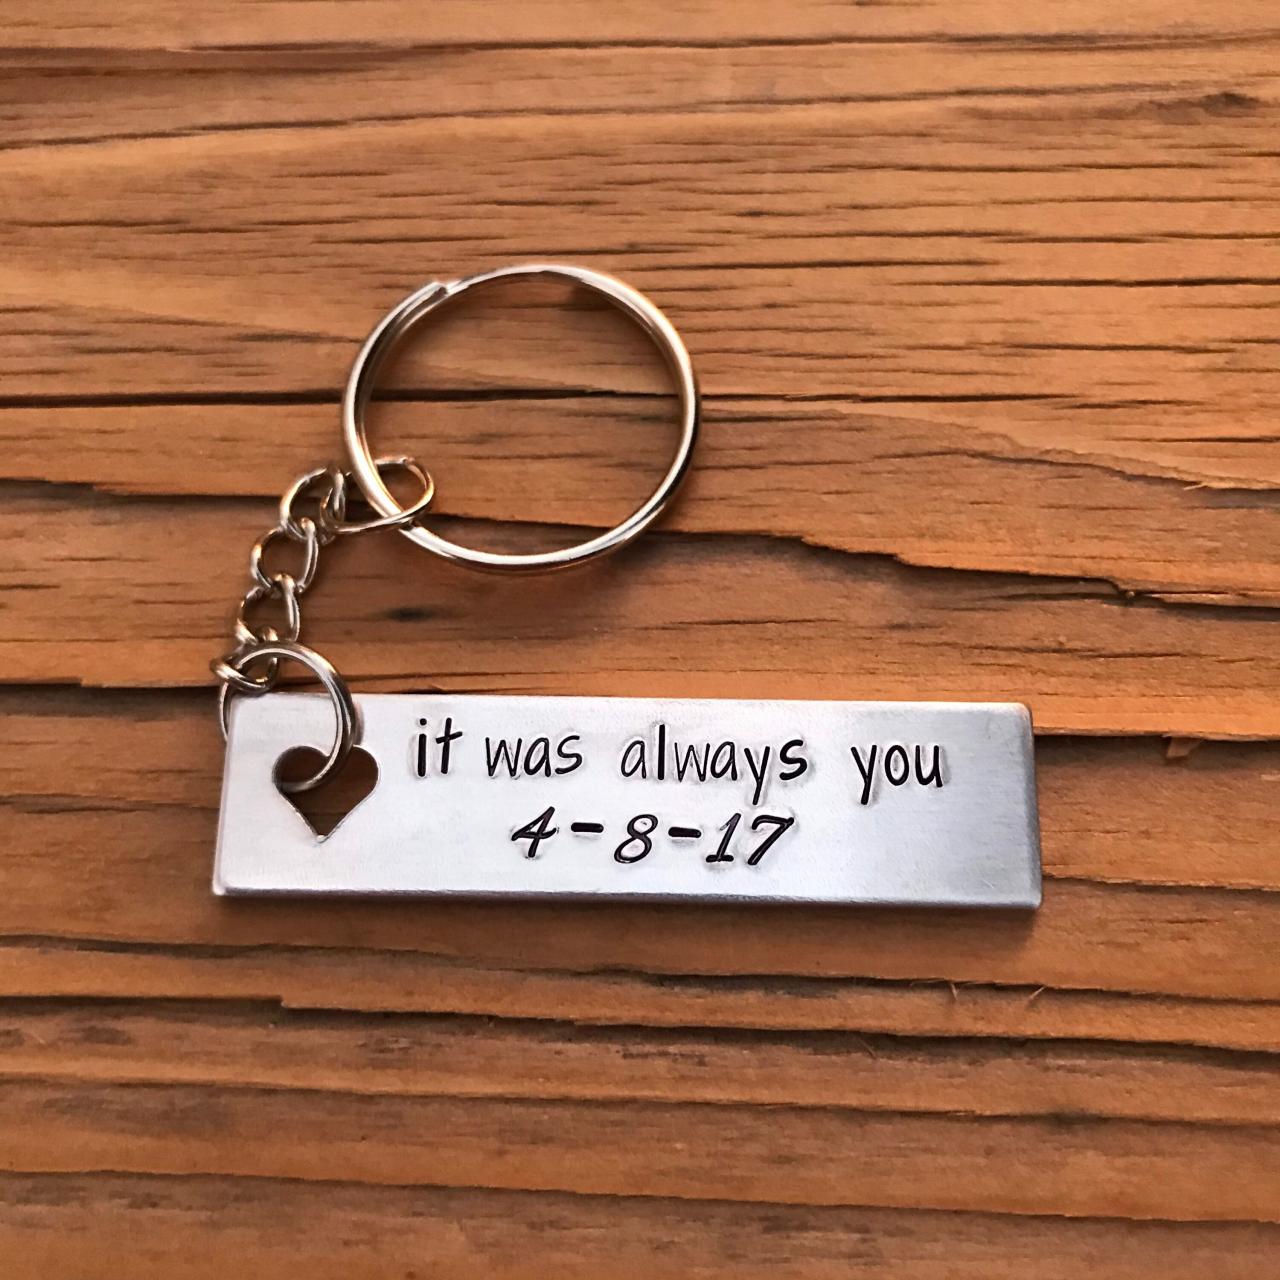 It was always you, silver color metal, lightweight aluminum, love, thoughtful gift, keychain